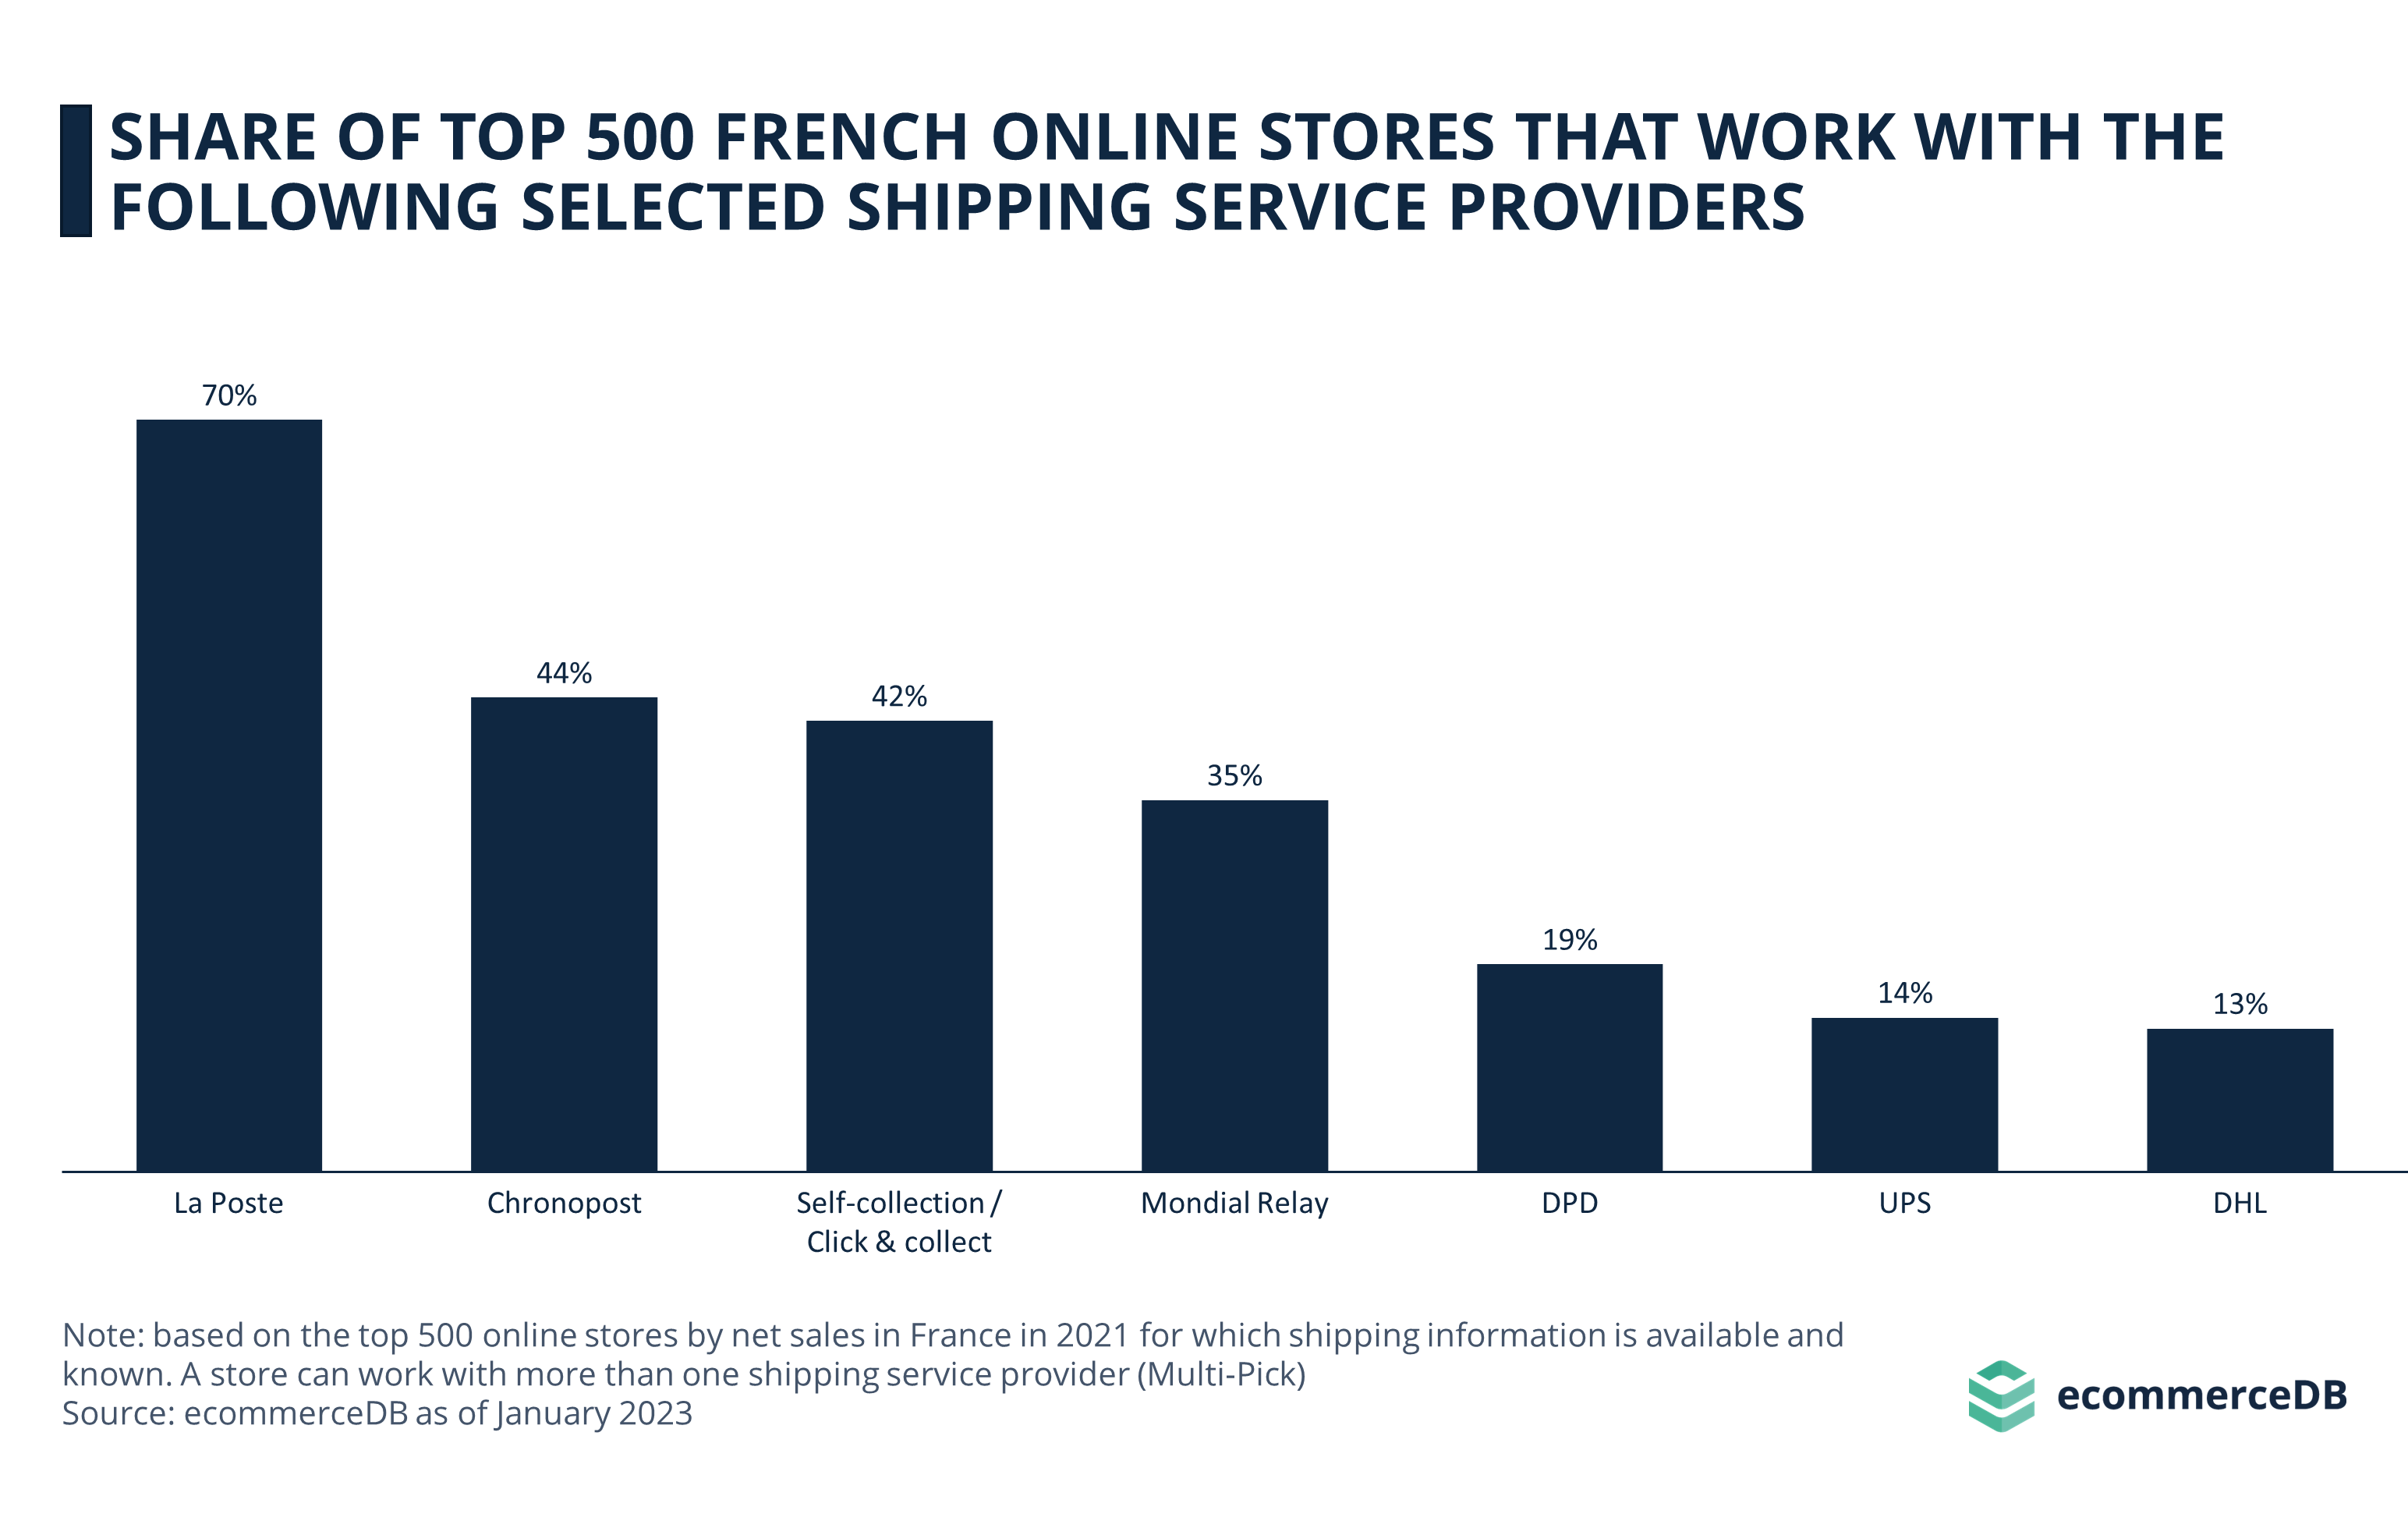 Share of Top 500 French Online Stores That Work With the Following Selected Shipping Service Providers